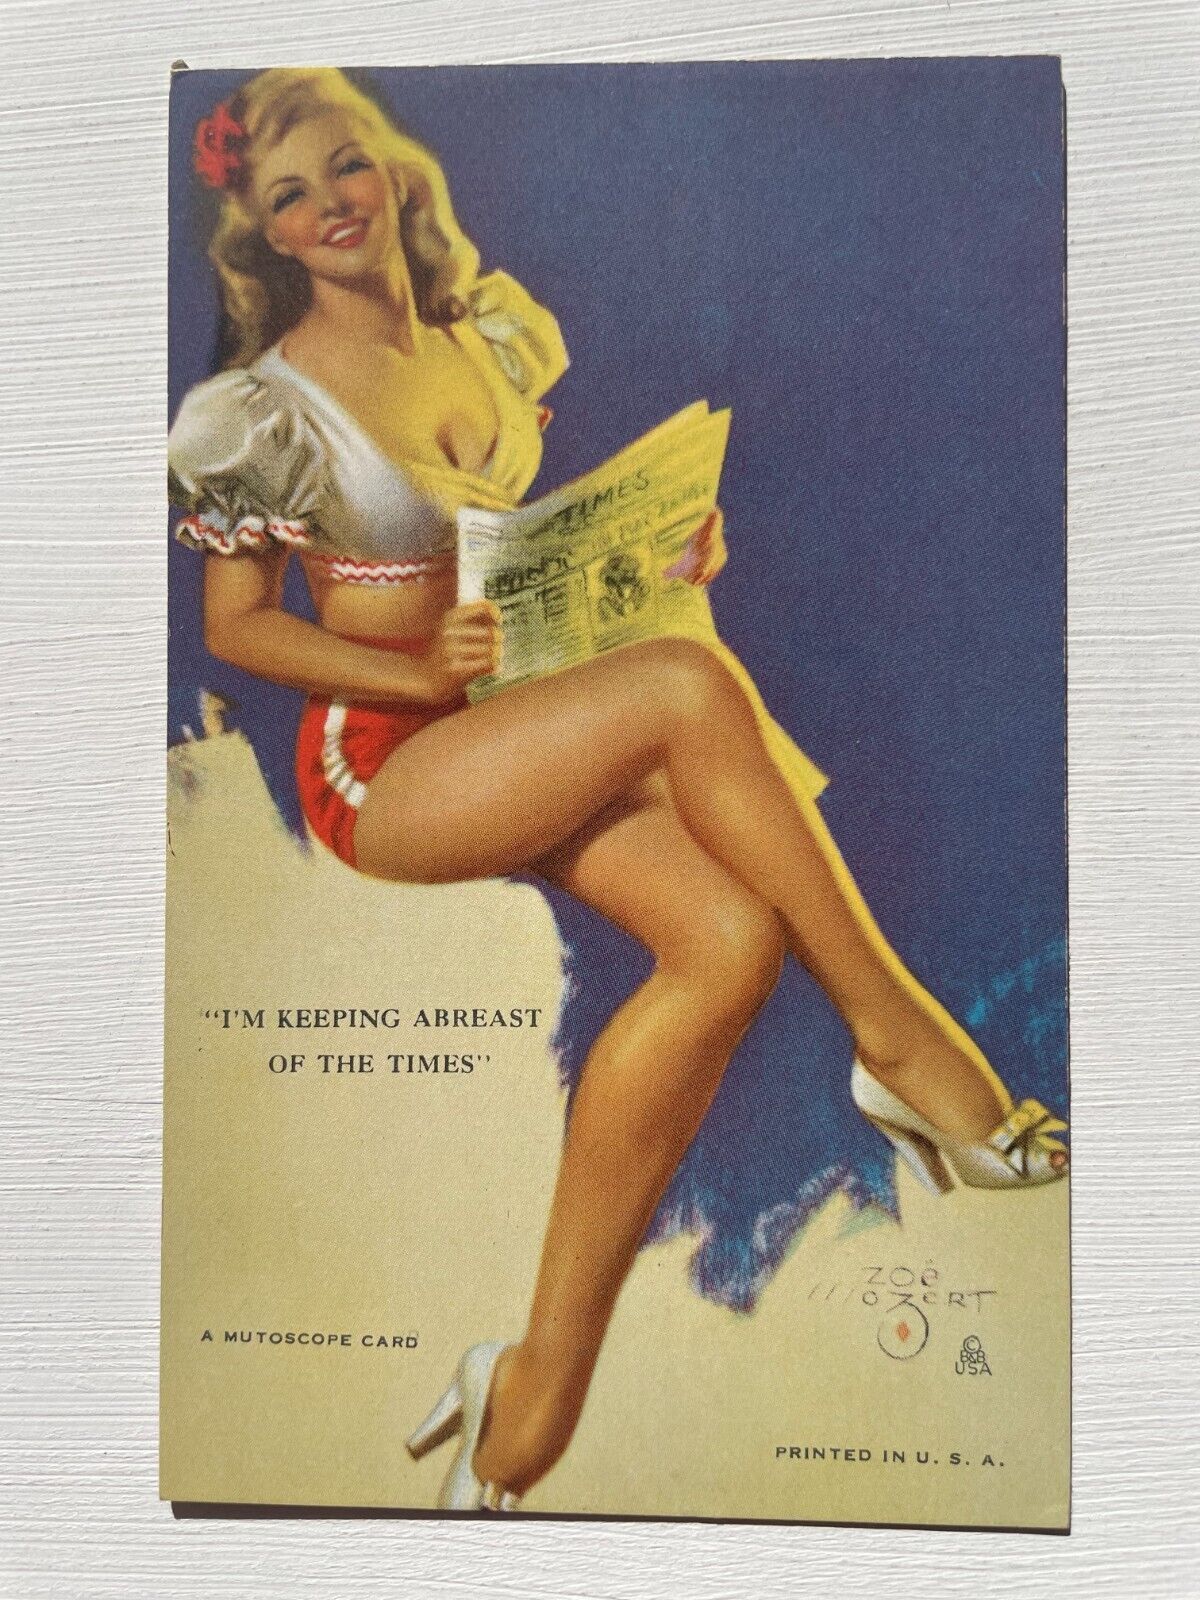 1940's Pinup Girl Picture Mutoscope Card-Zoe Mozert- Keeping Abreast of the Time